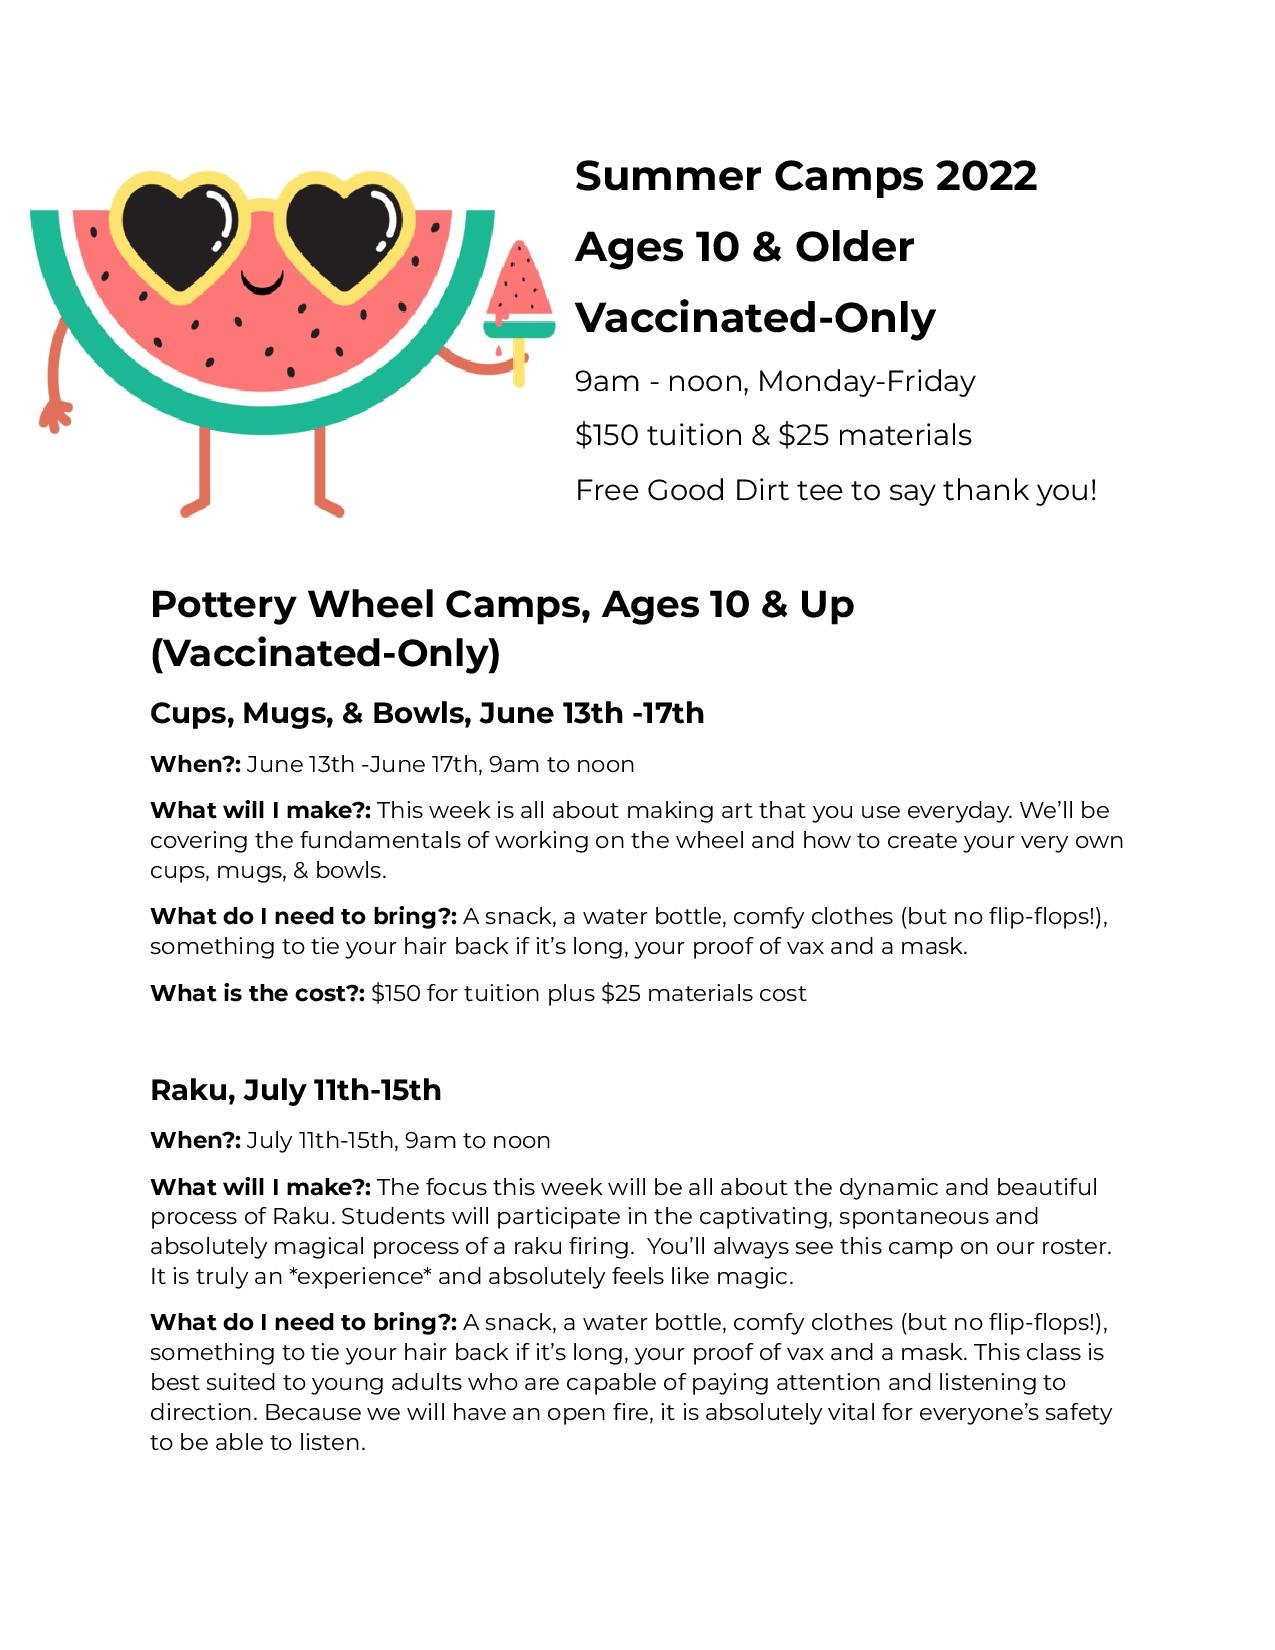 Good Dirt Pottery Studio on Instagram: We have TWO more 4-Day Summer Clay  Camps for Kids in July @ Good Dirt Pottery Studio! (July 10-13 & 24-27) ⛱️  4 days long, 9